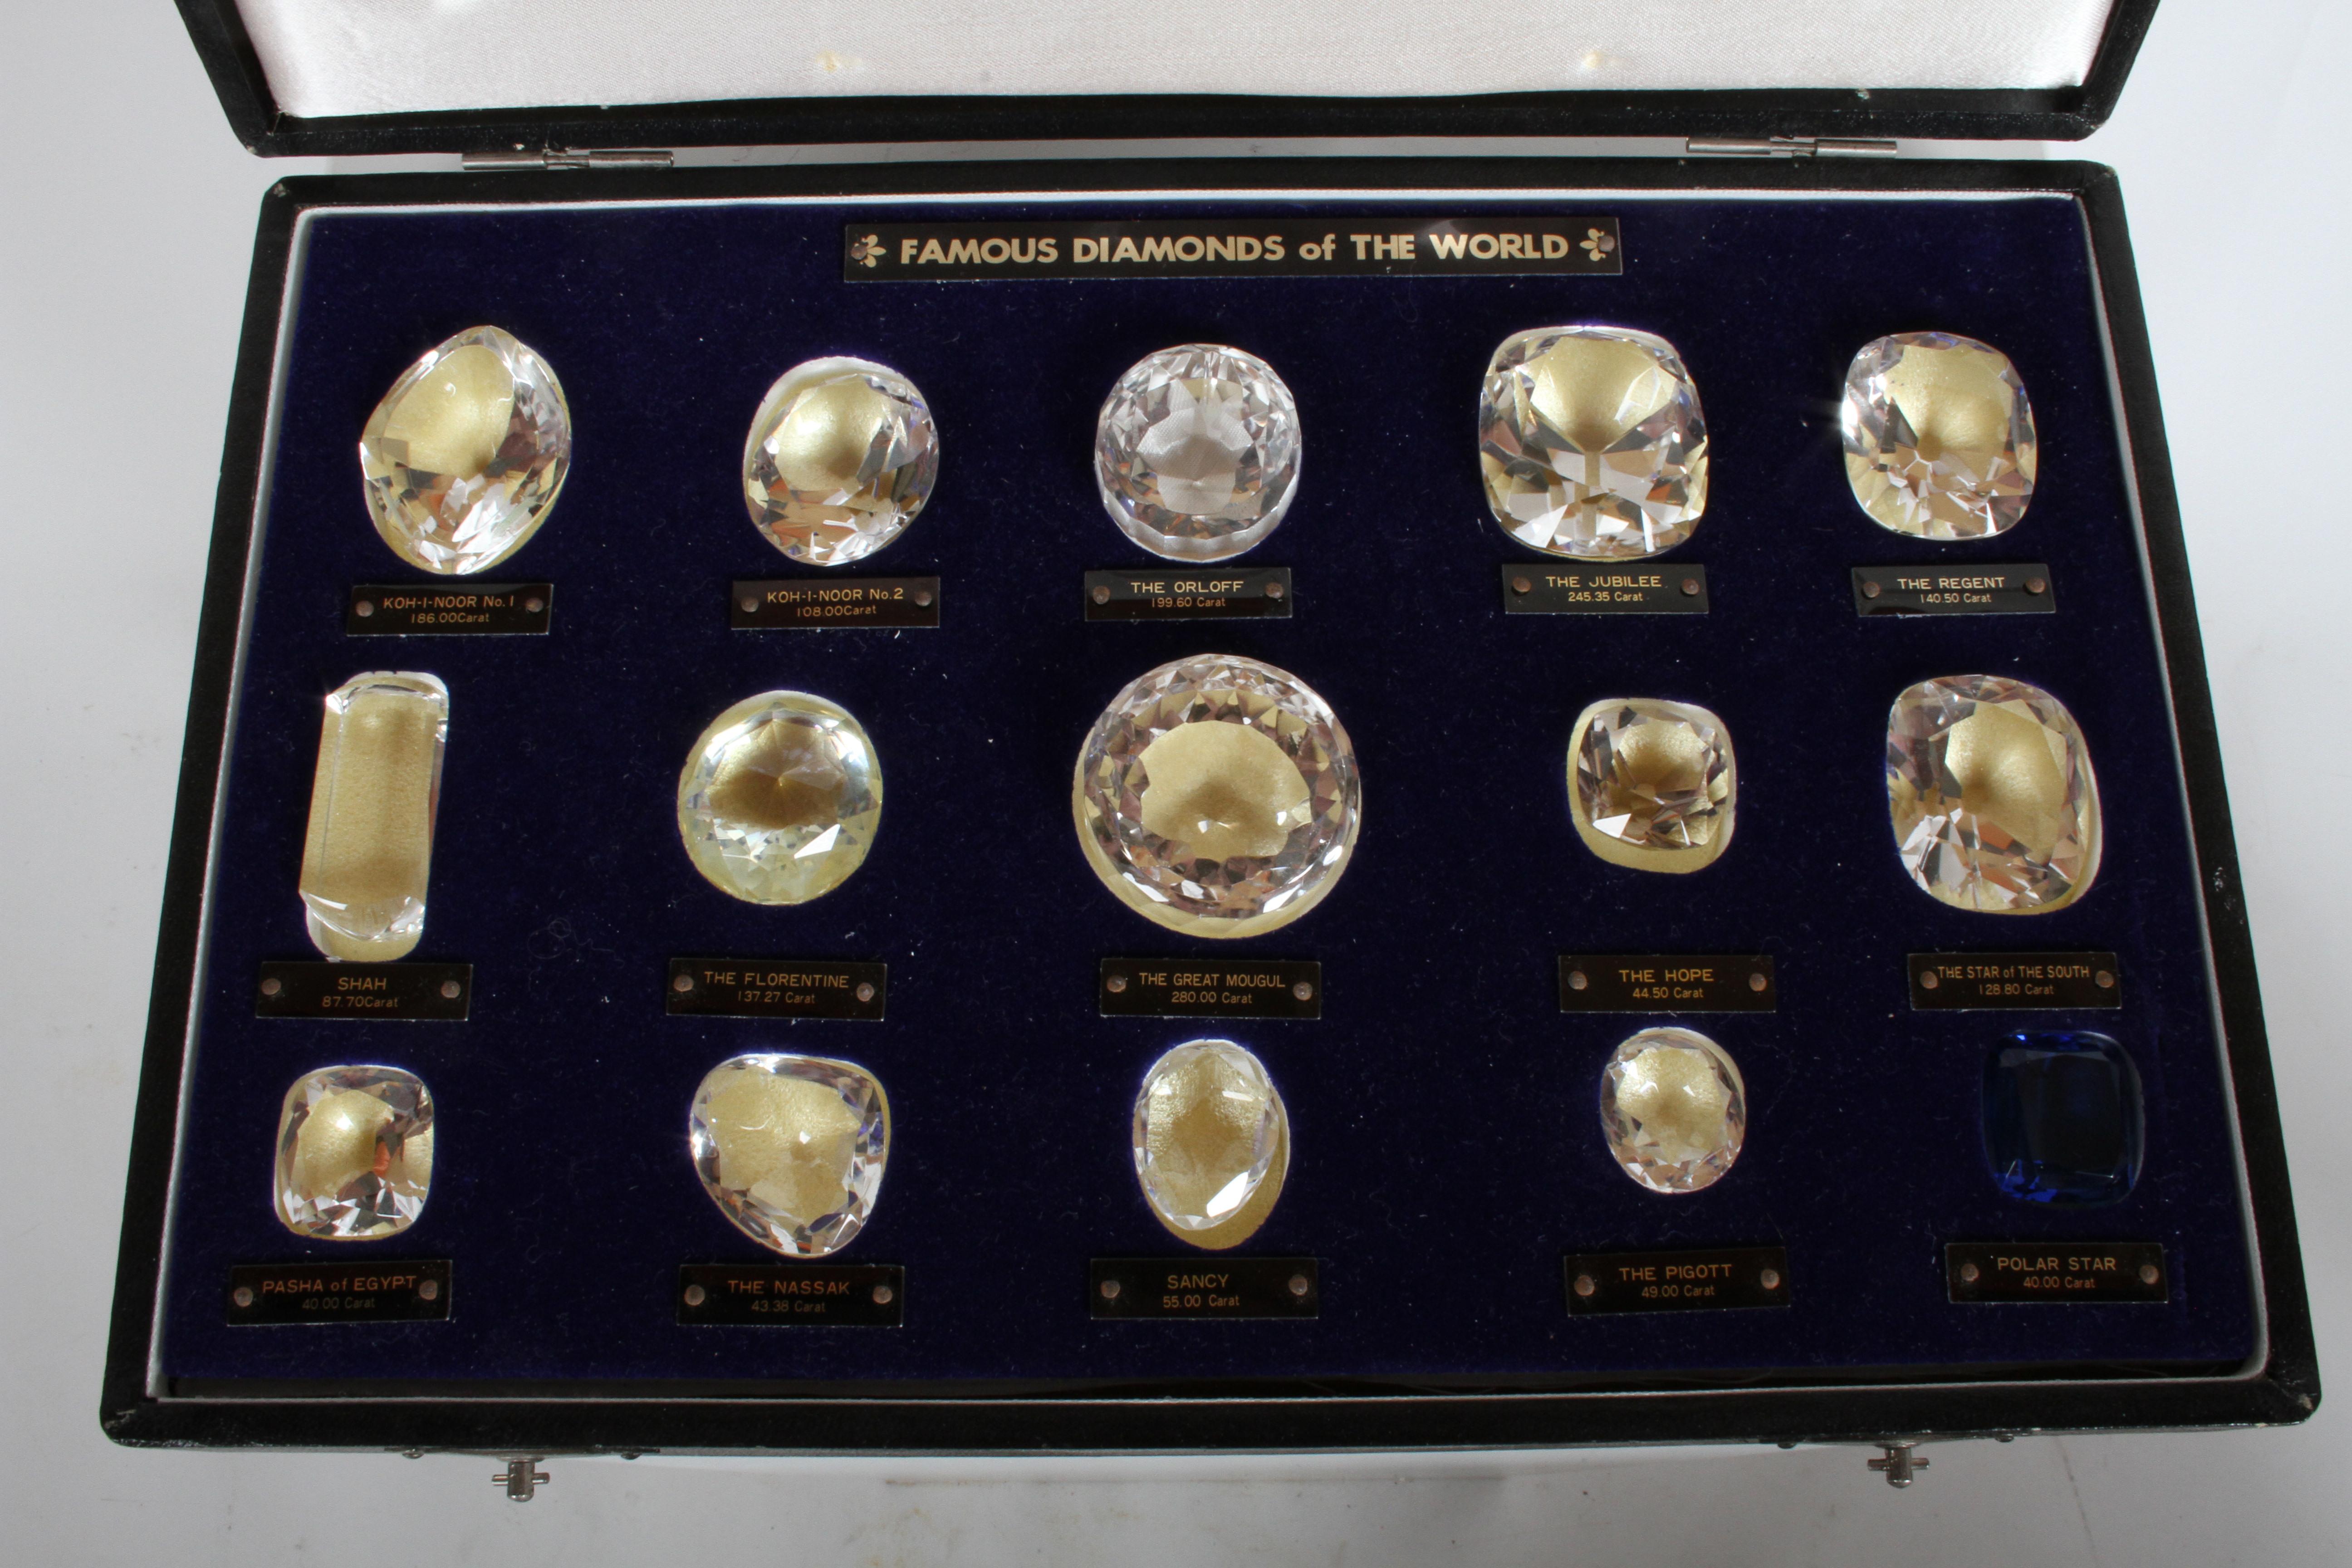 Antique Set of 15 Historical & Famous Diamonds of the World Replicas in a Case 6